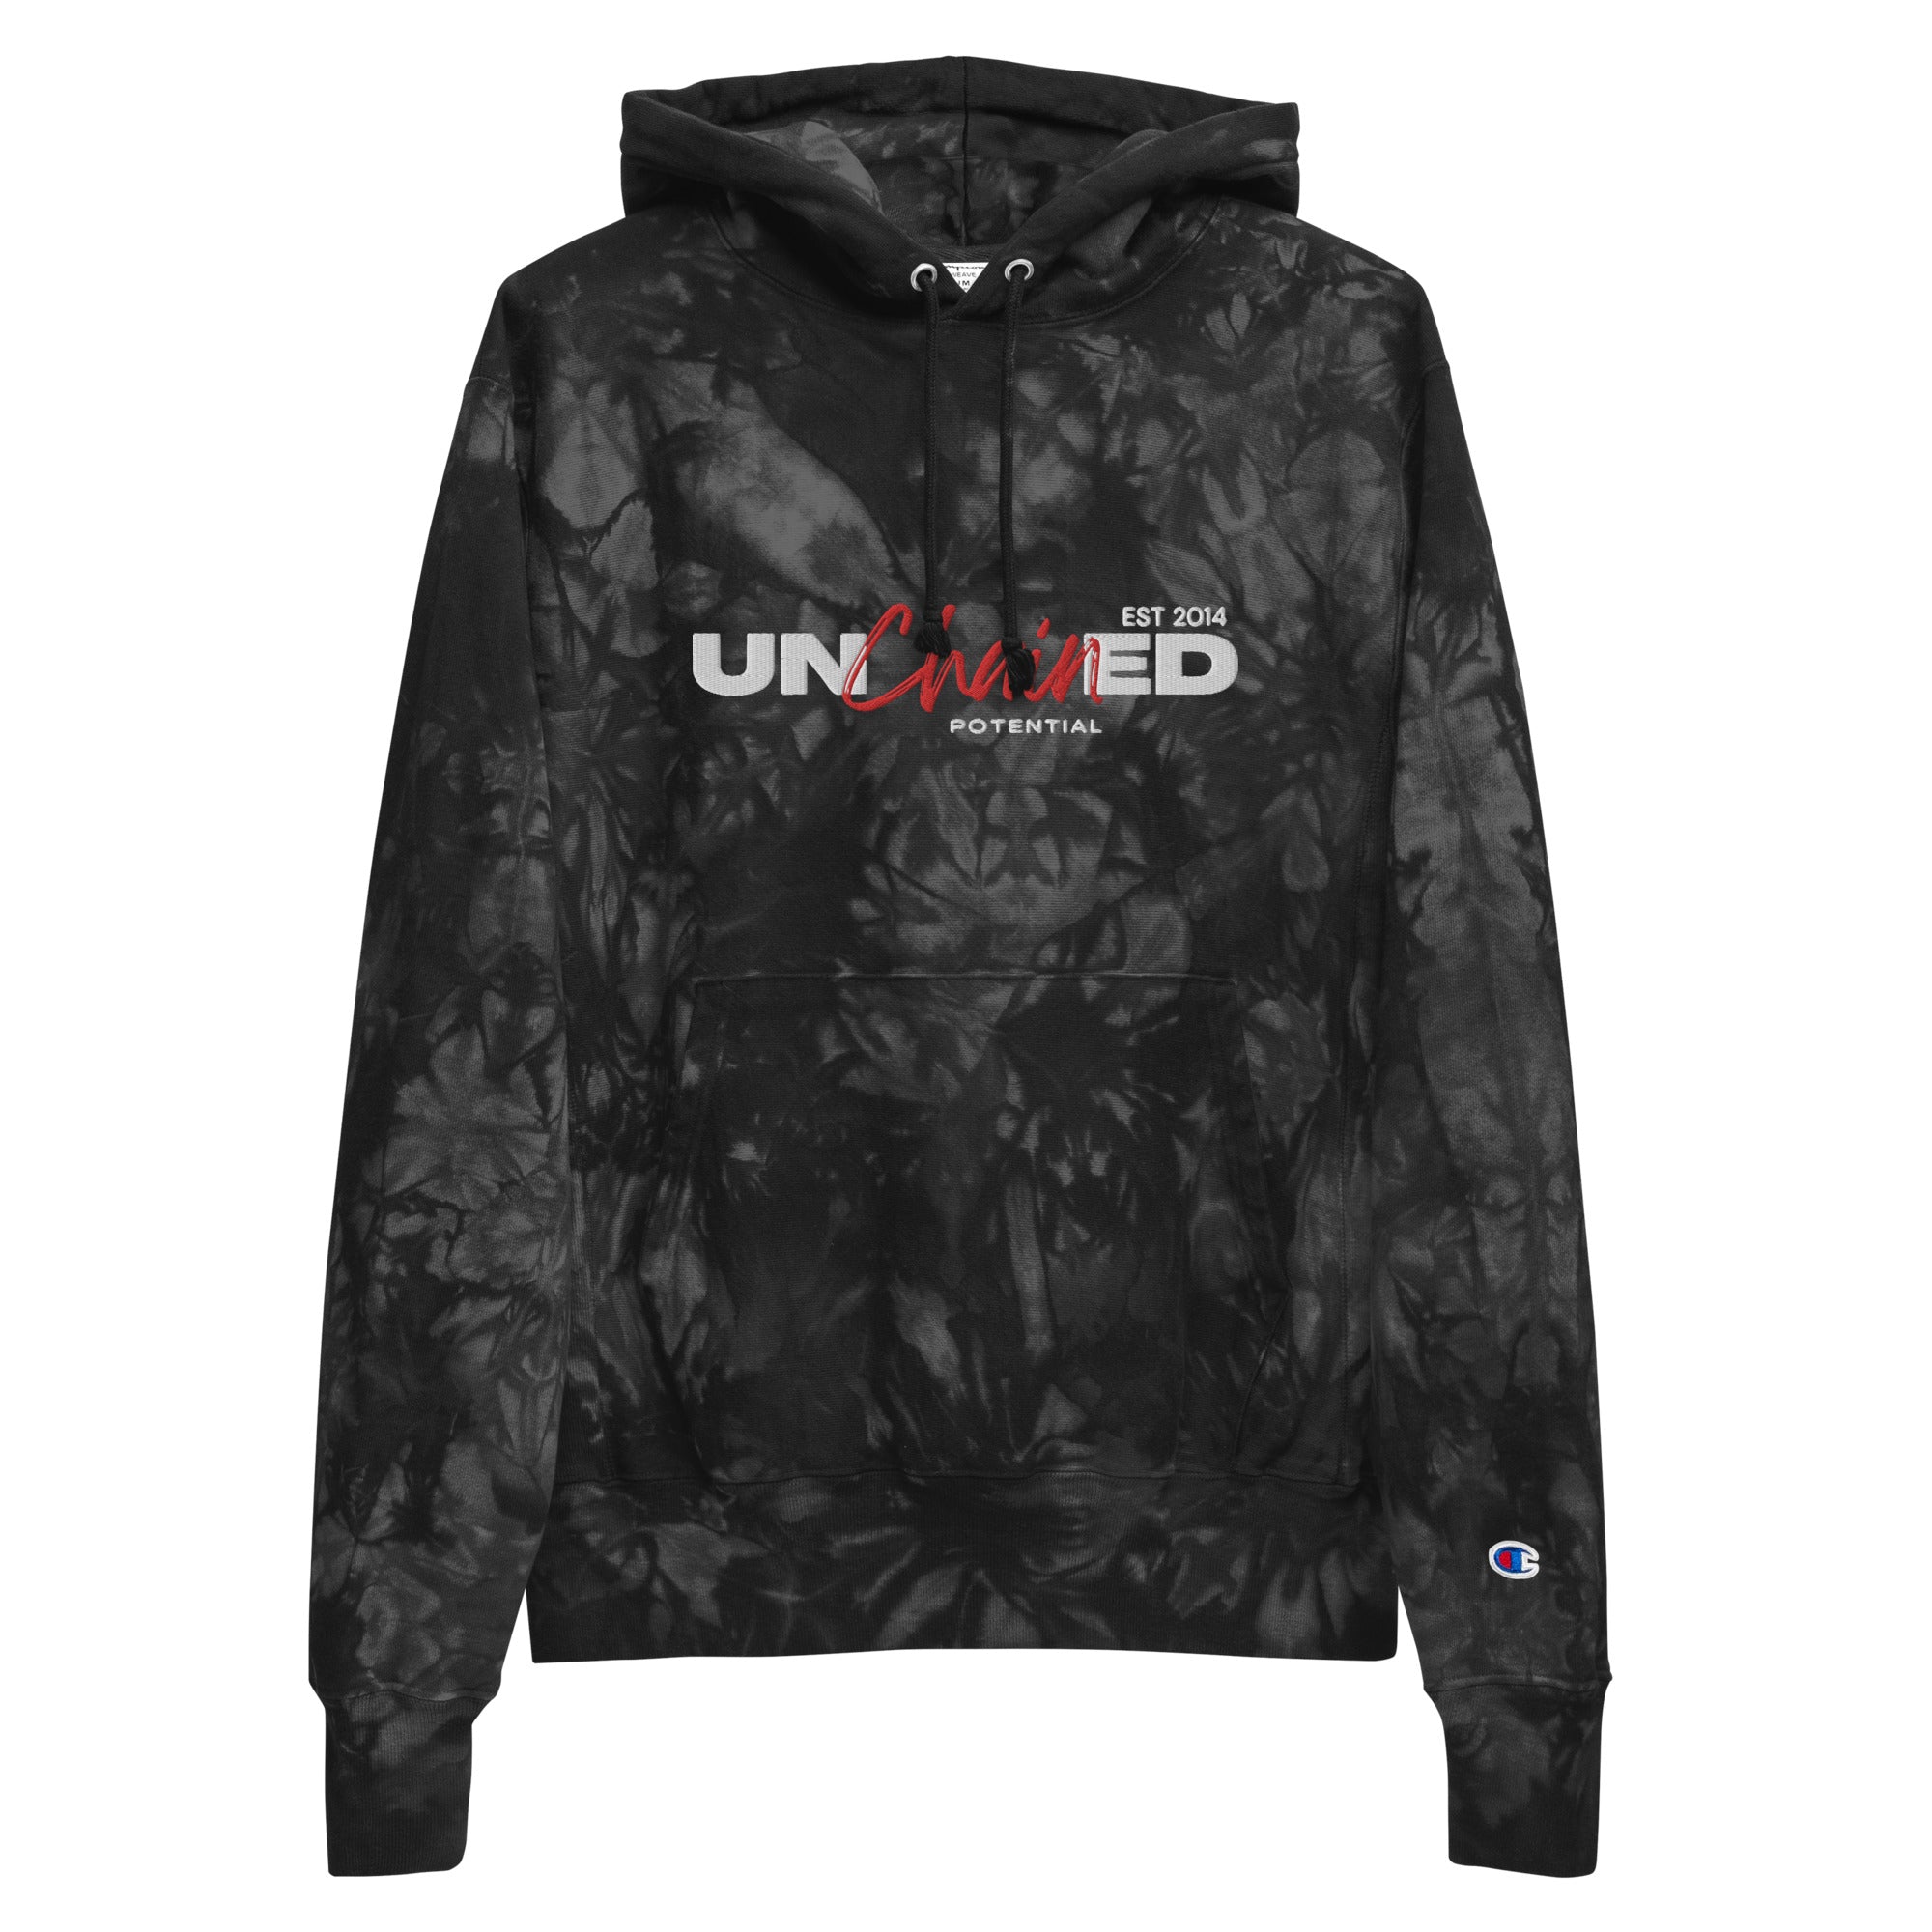 Unchained Potential Unisex Champion tie-dye hoodie v4